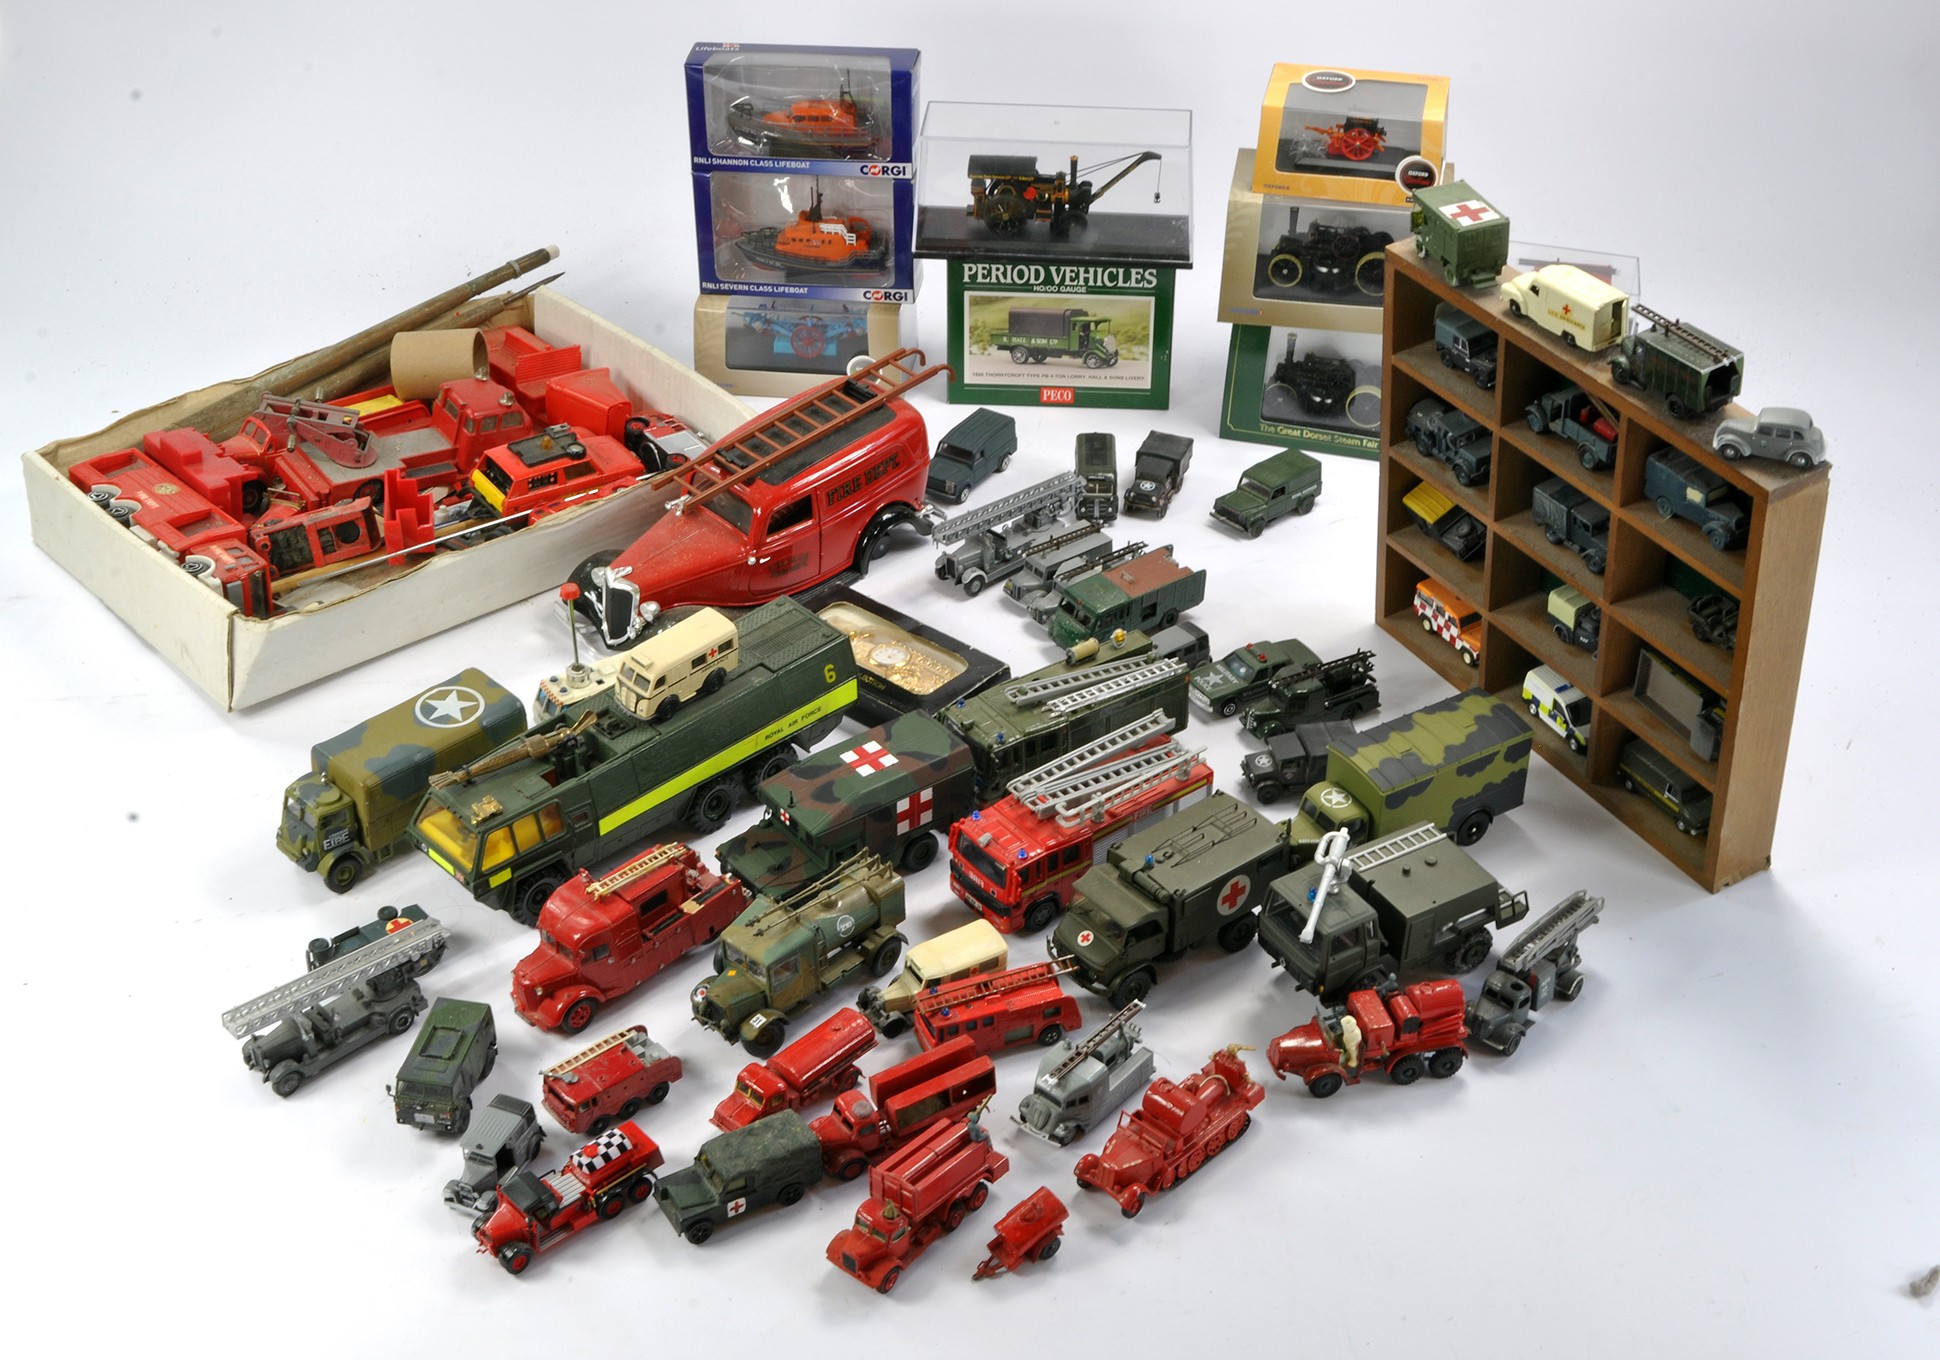 An interesting and large assortment of military themed model vehicles comprising diecast and plastic